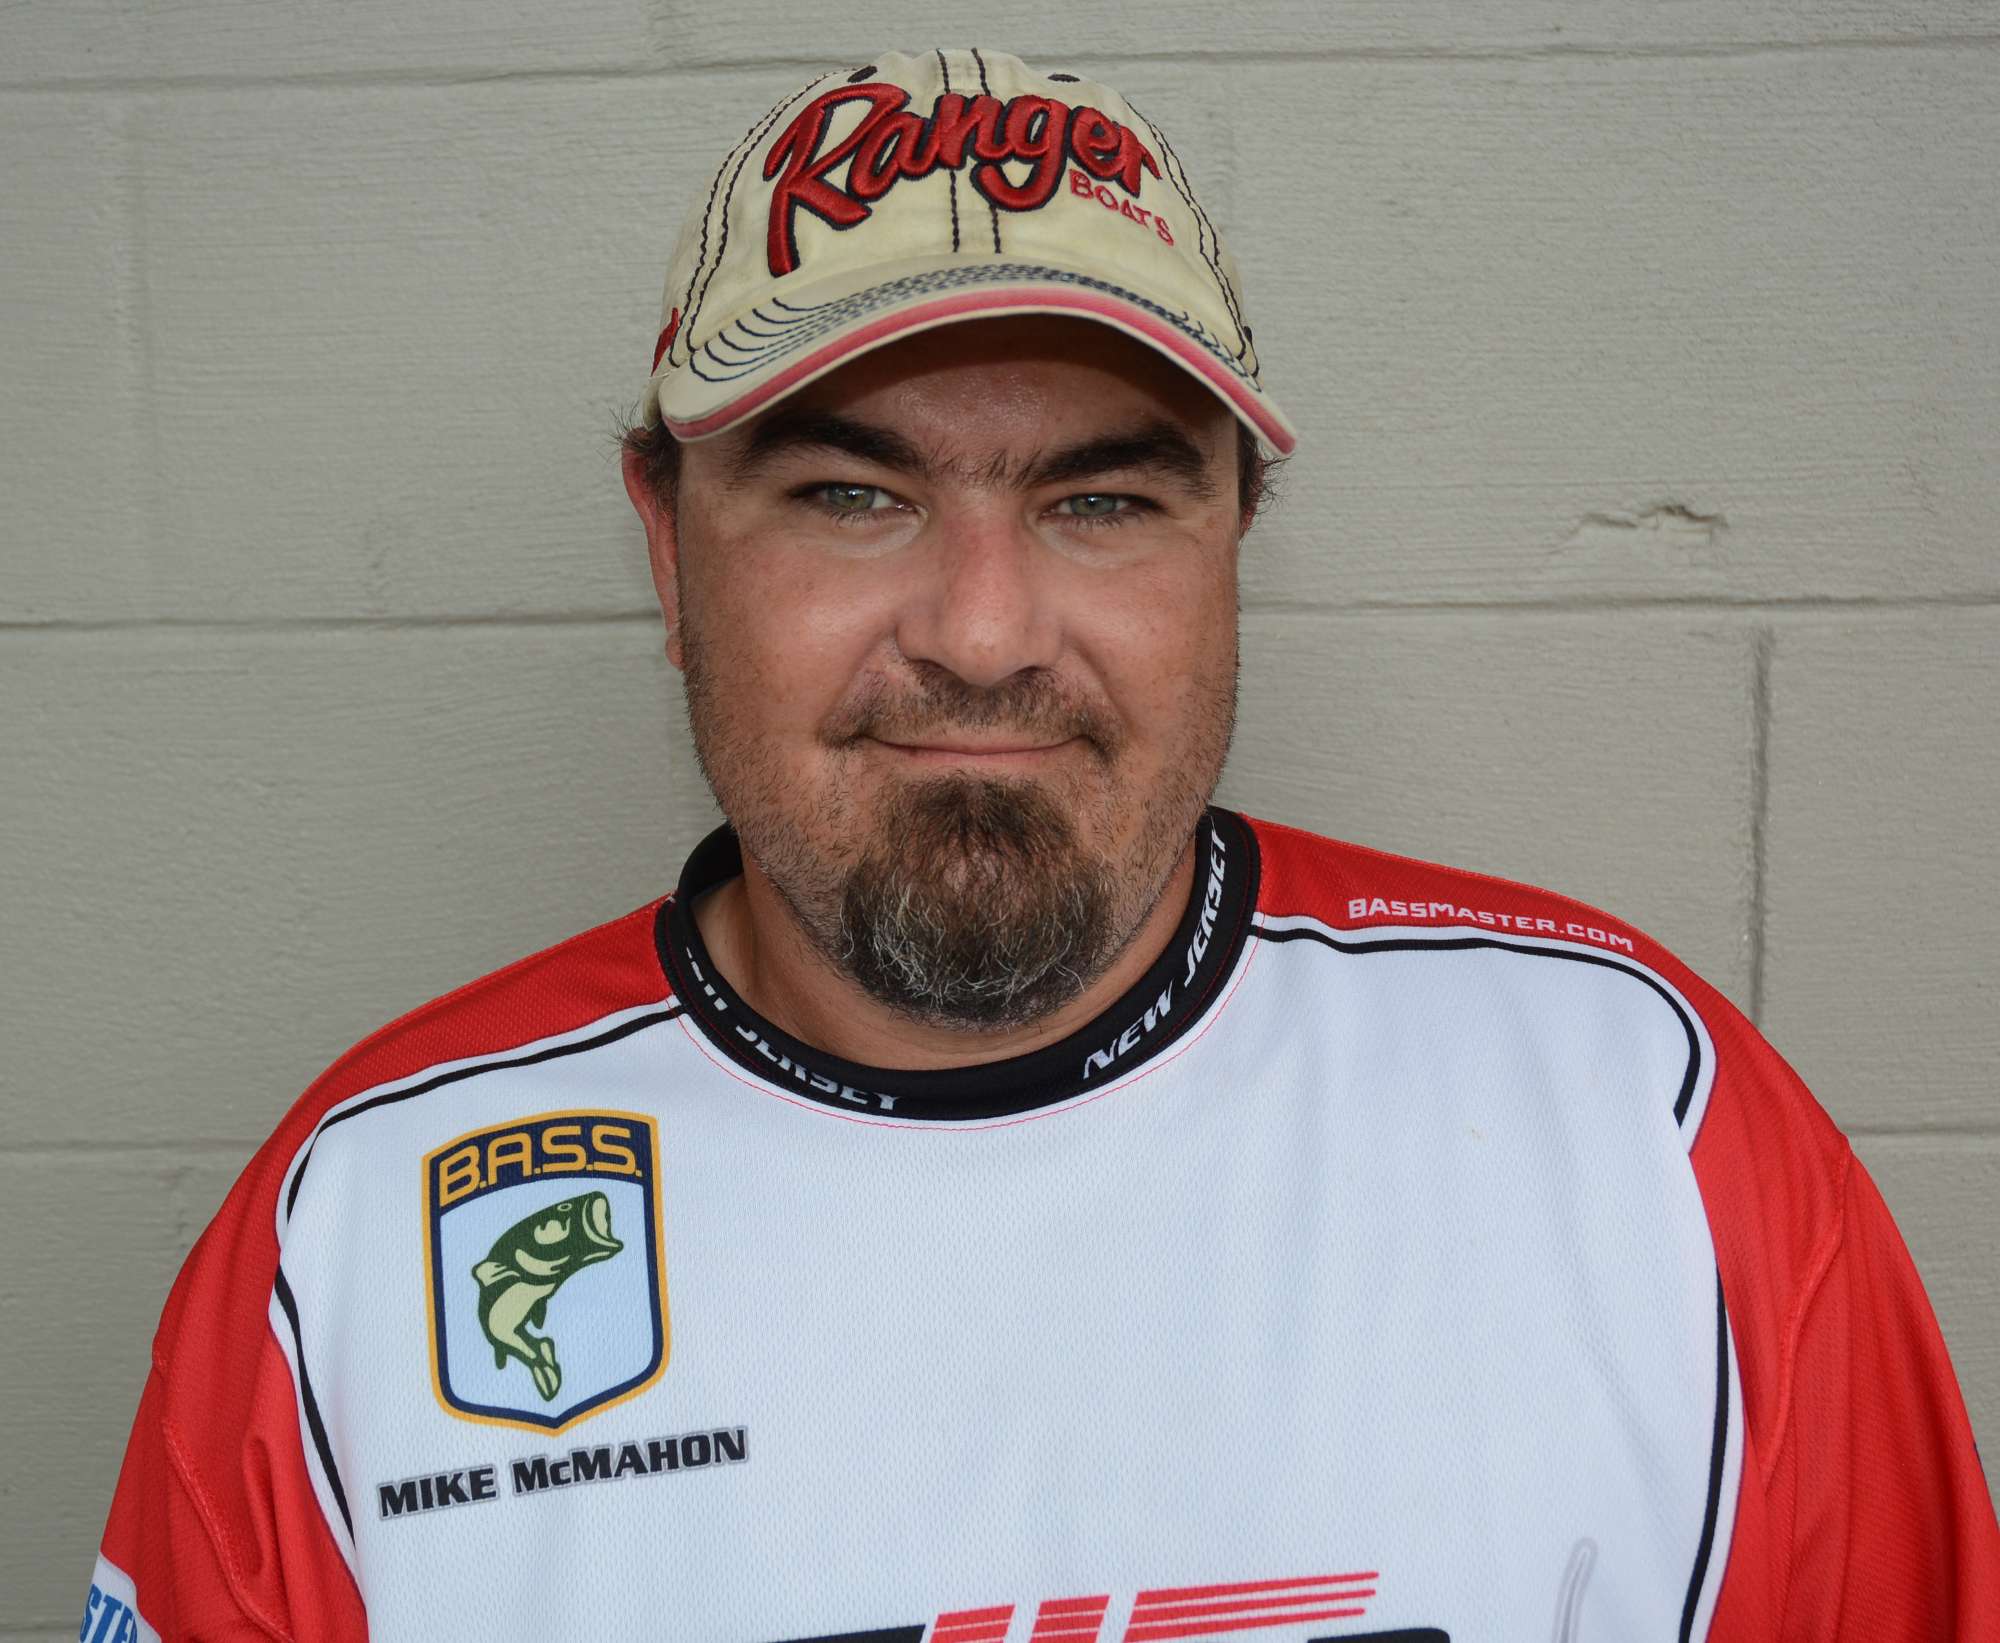 Michael McMahon of New Jersey will be competing in his first B.A.S.S. Nation championship this fall. The engineering project manager is a member of the Warren County Bassmasters. He loves spending time with kids, doing whatever it is they want to do â amusement parks, sports, hitting the beach or going down to the boardwarlk. McMahon is also an avid golfer.